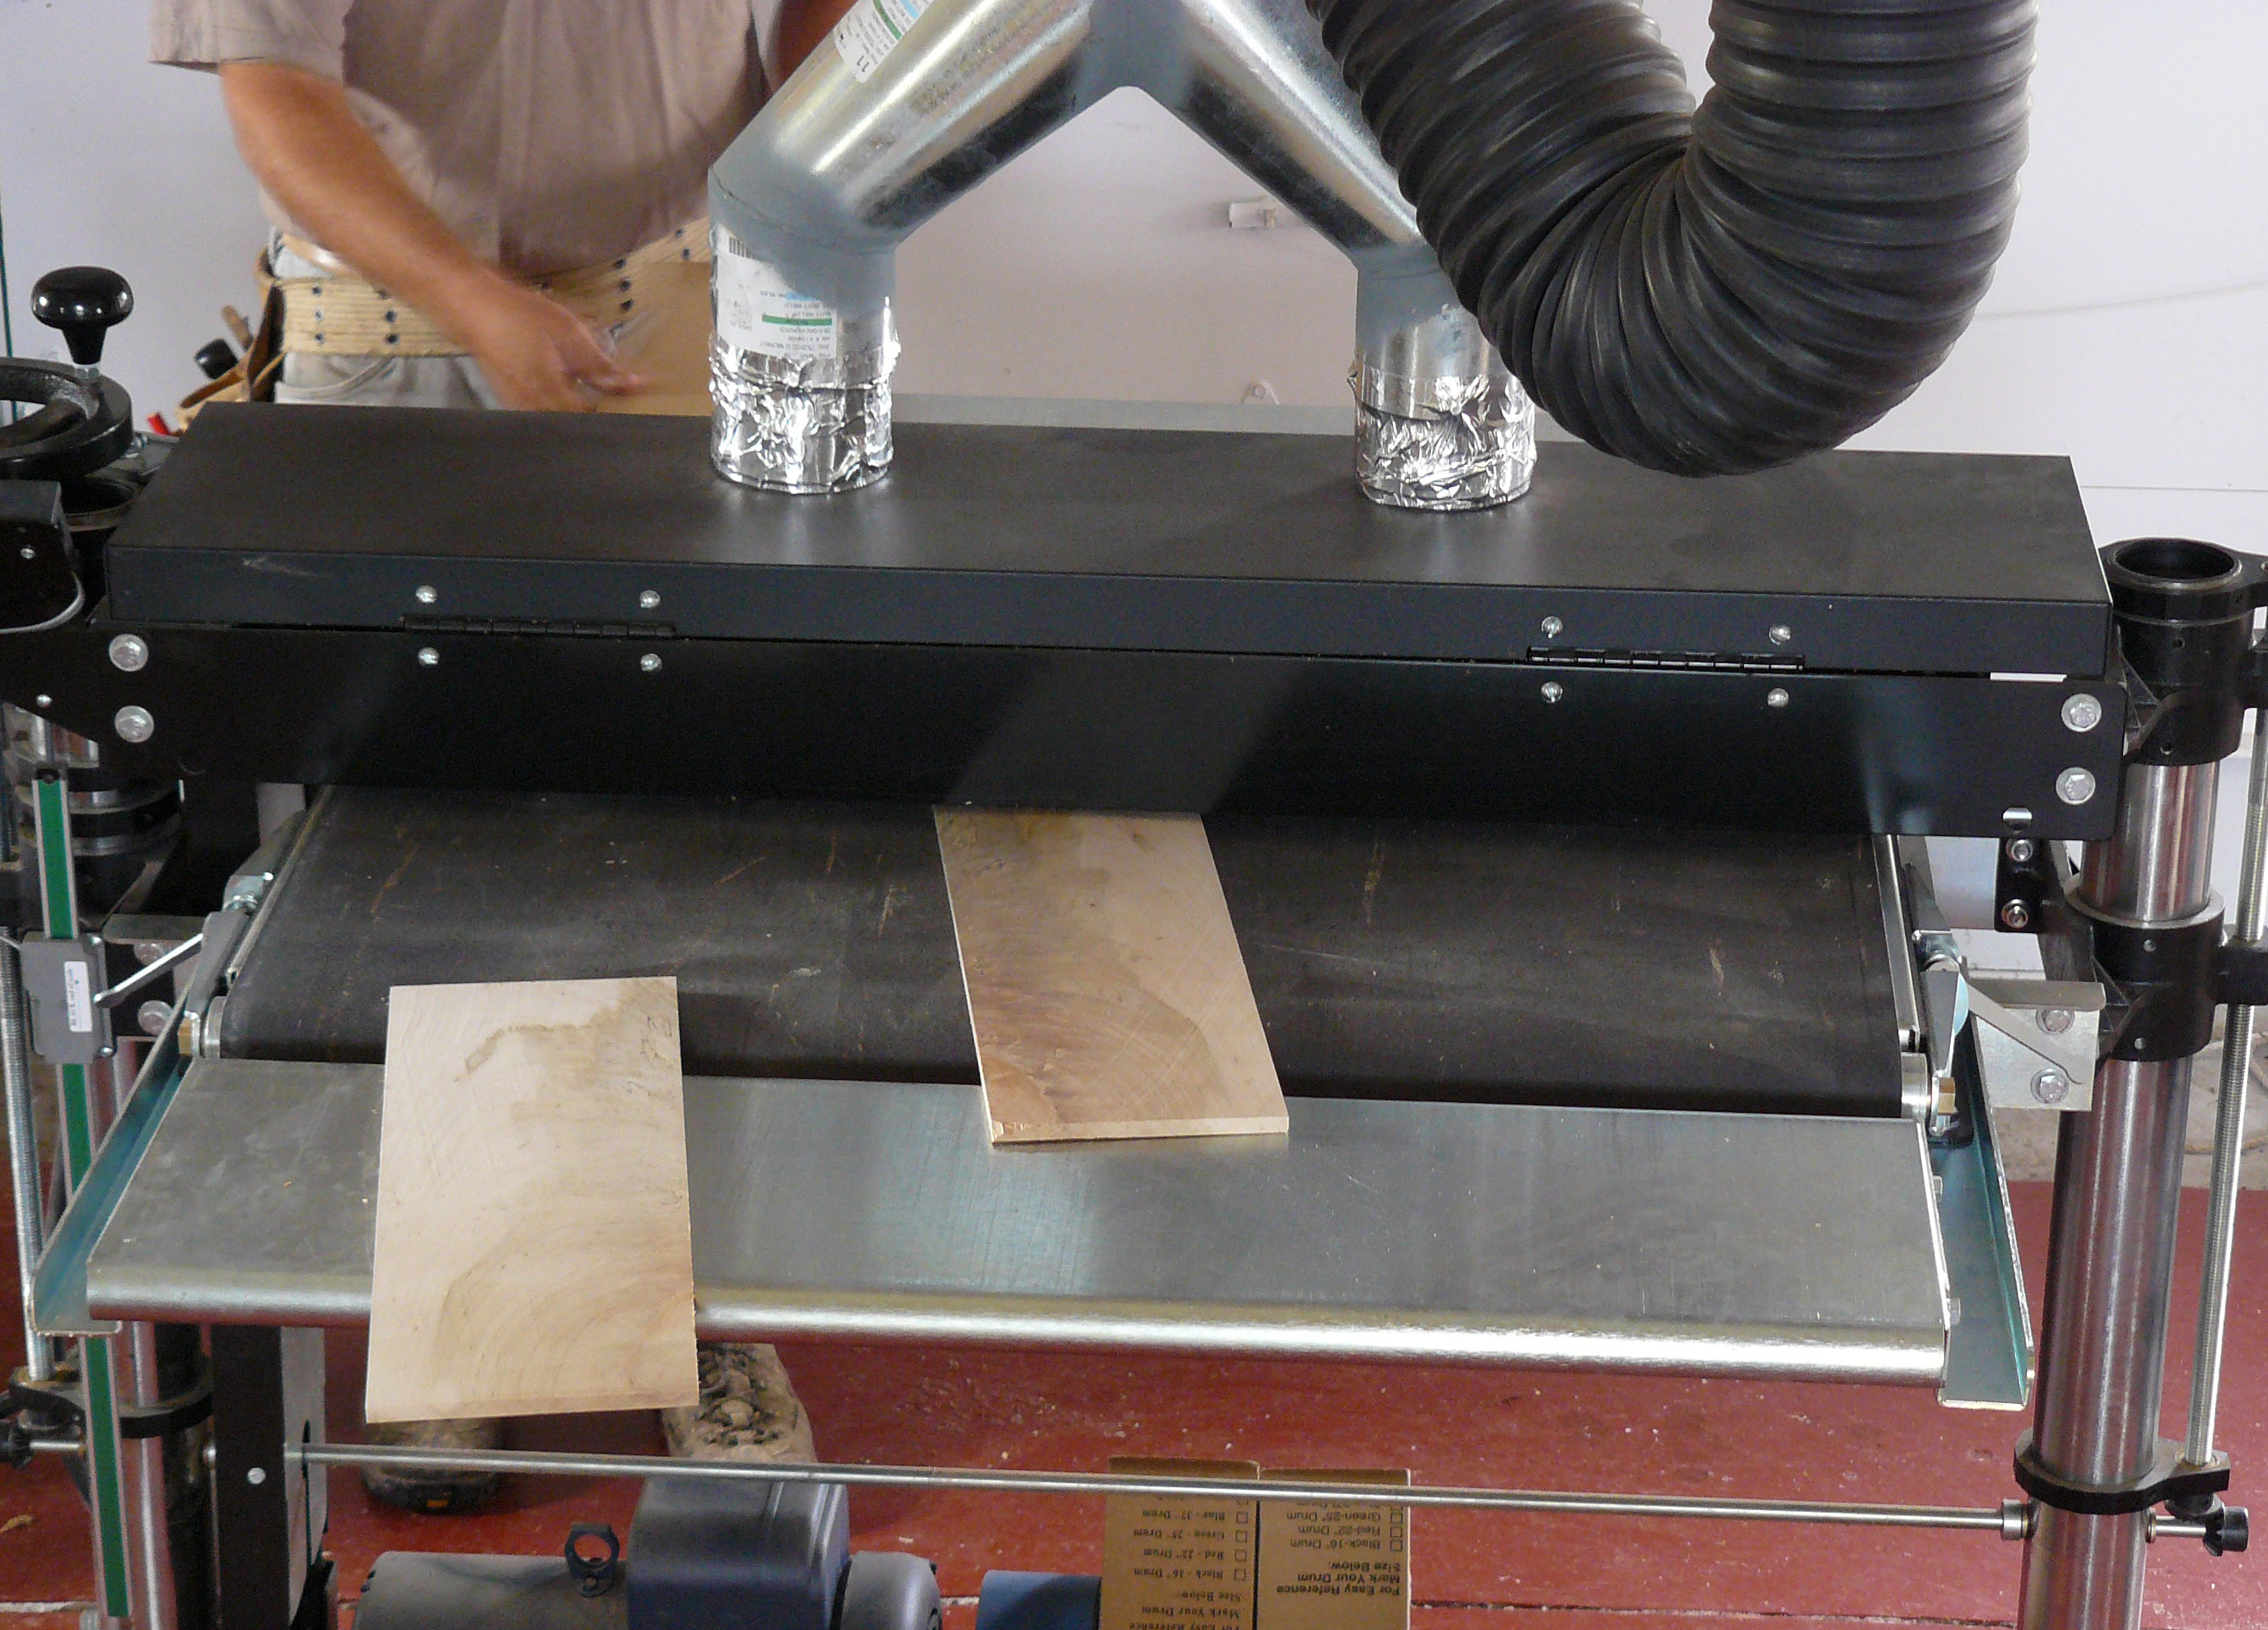 Reviewing the SuperMax 37-Inch Drum Sander